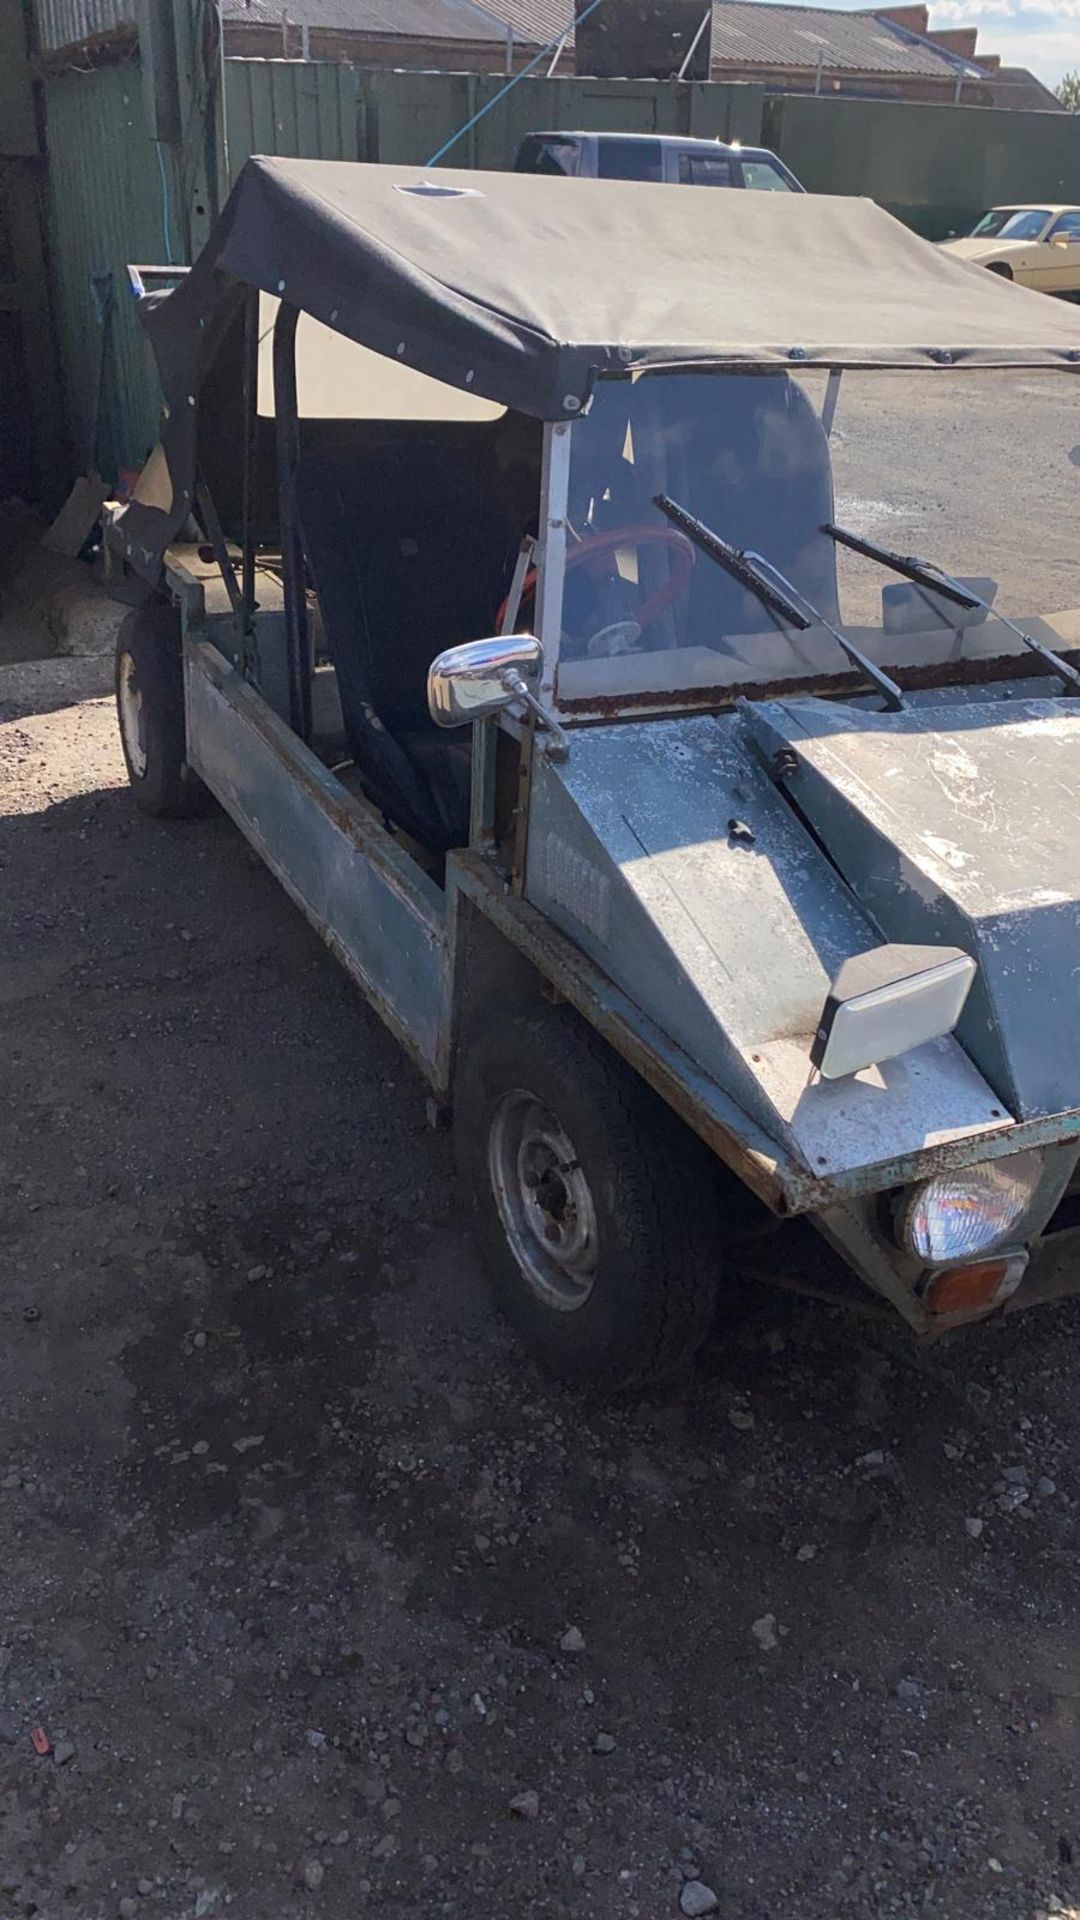 1977 MINISCAMP BUGGY 998CC PETROL SILVER, V5 PRESENT - BARN FIND! - Image 3 of 17